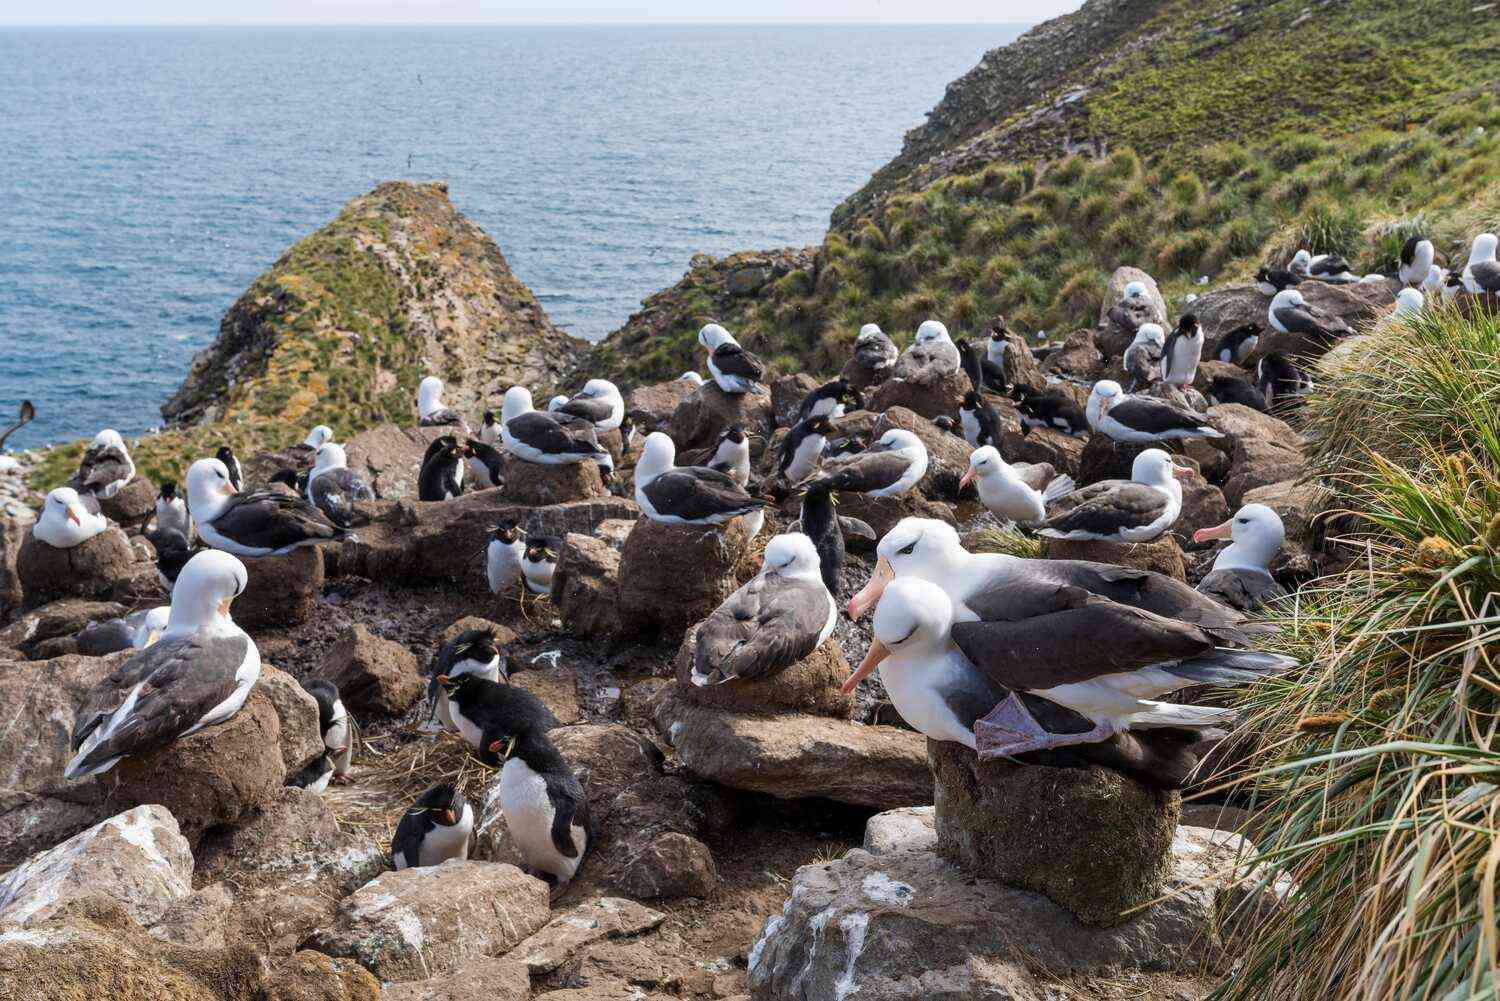 The decline of Albatrosses, a beloved bird, could be linked to climate change